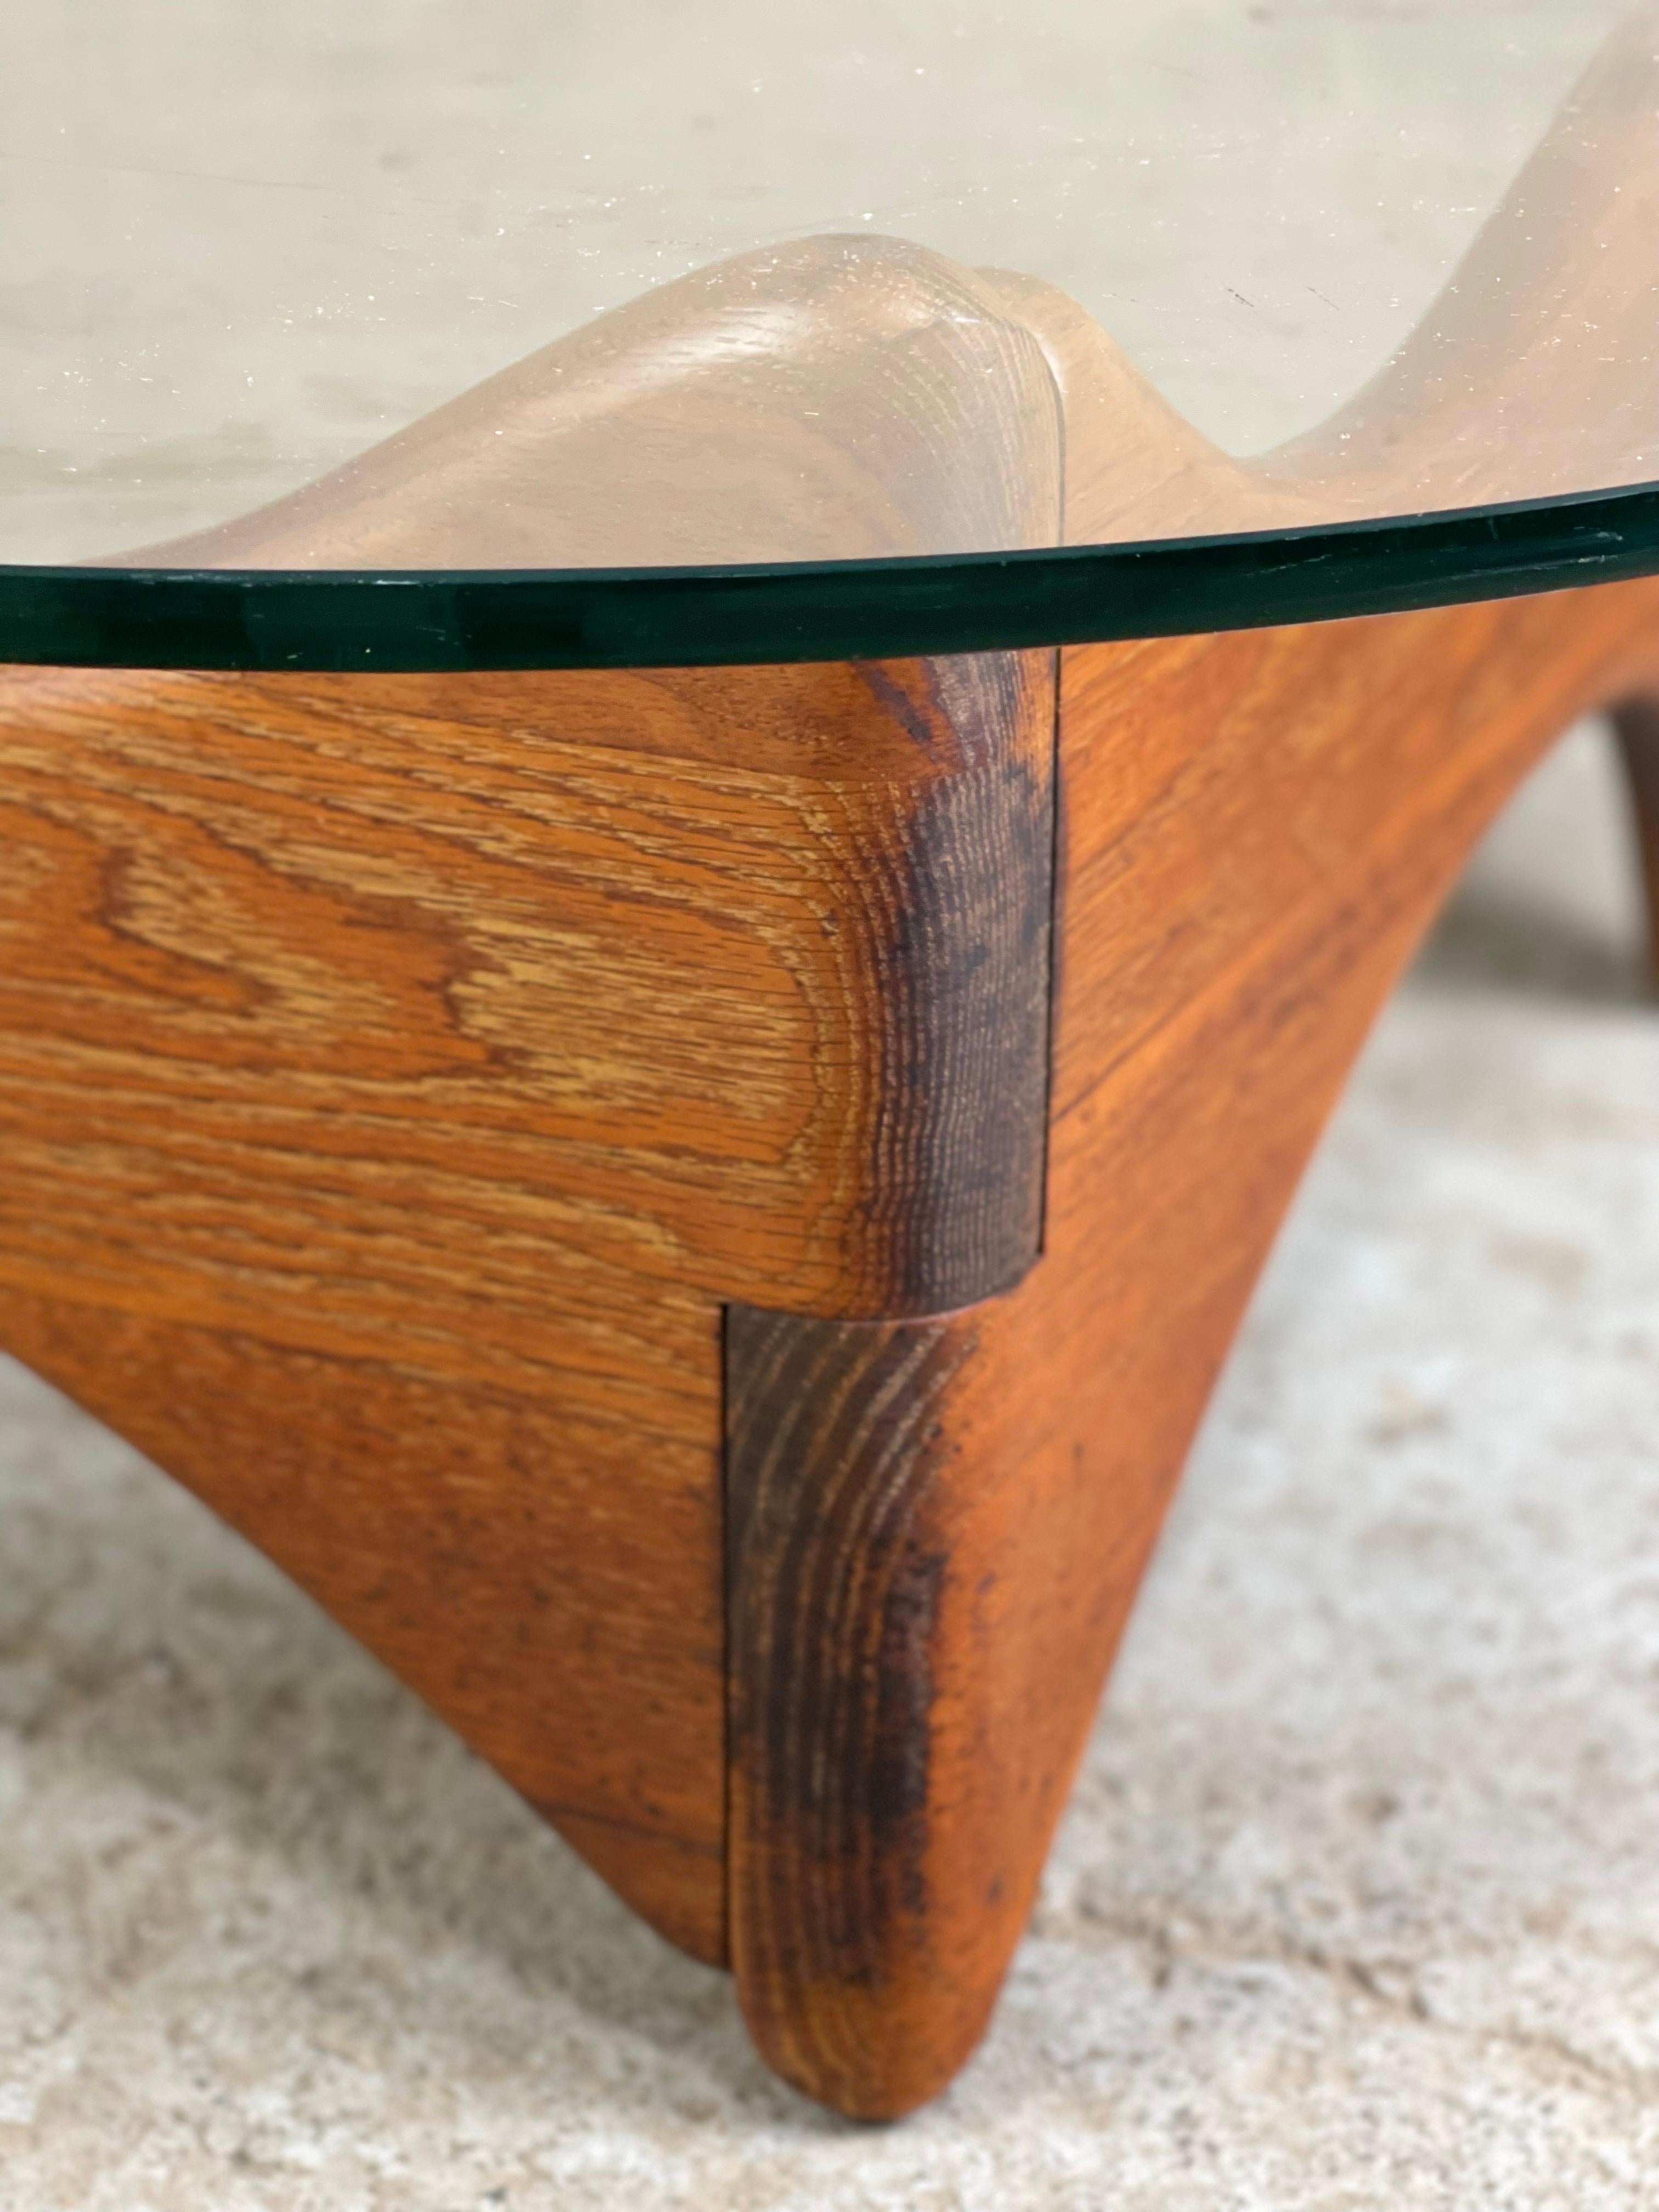 Glass Mid Century Modern Sculptural Coffee Table after Noguchi